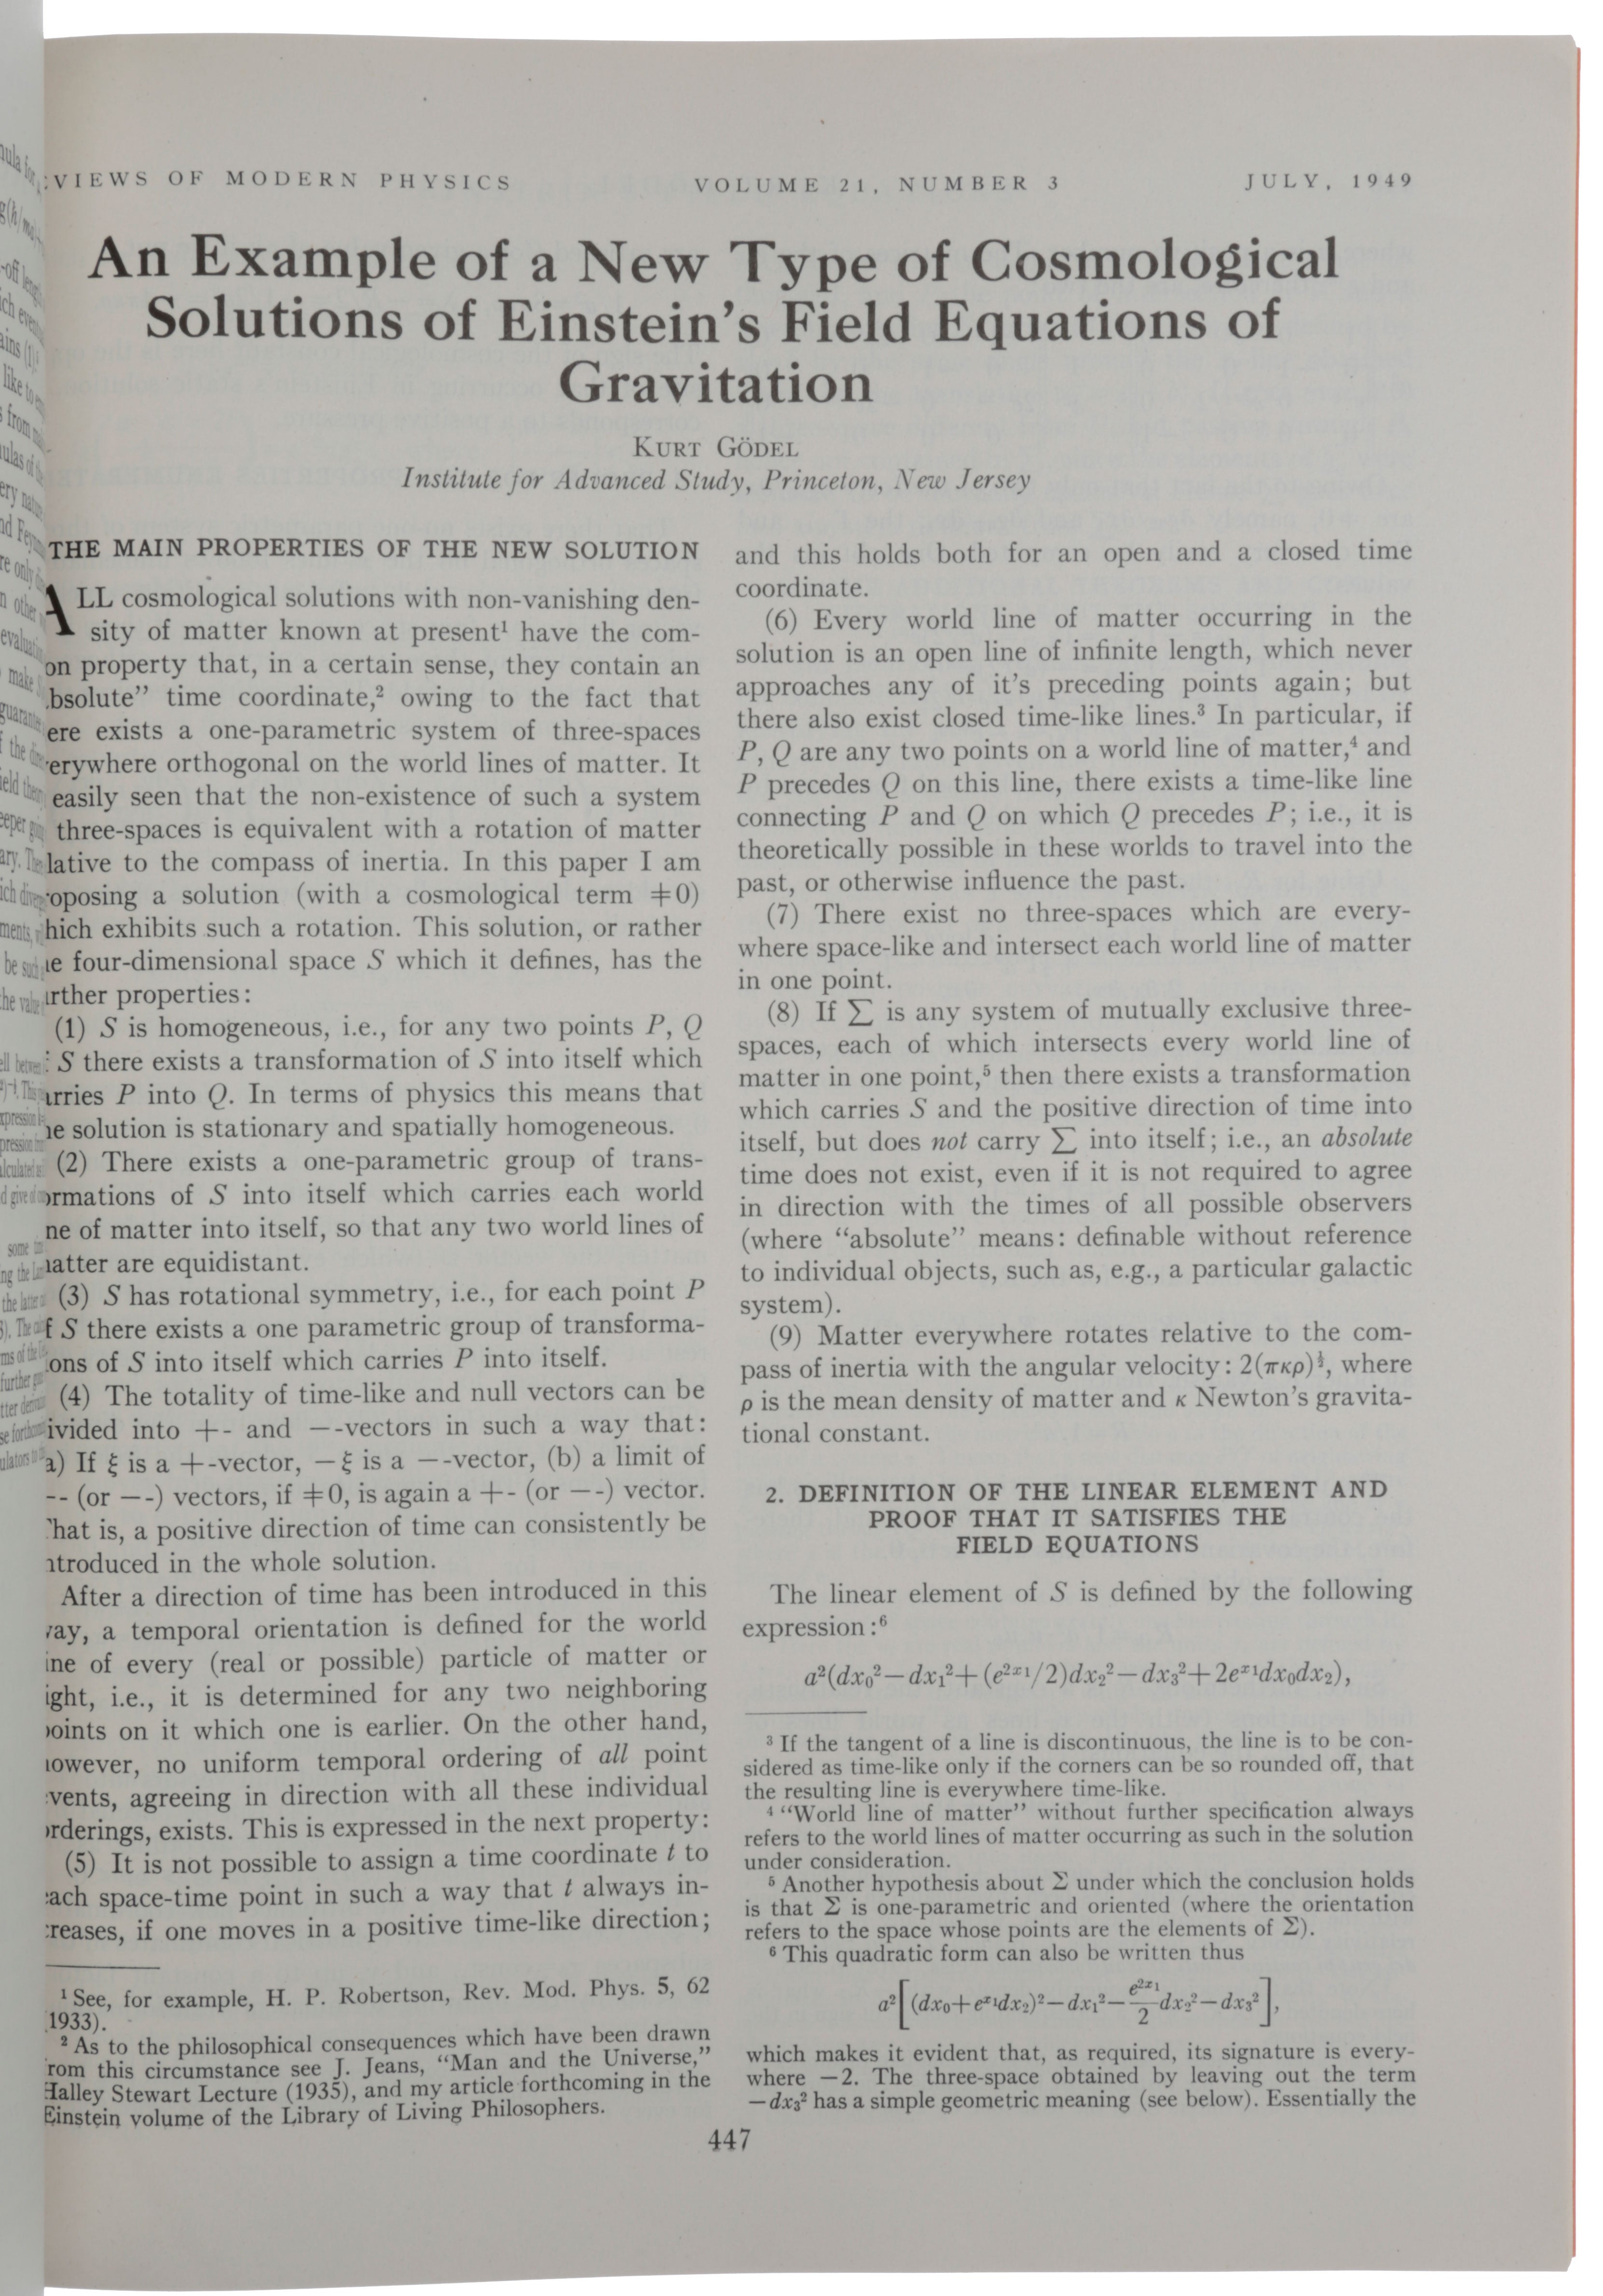 Item #5820 ‘An Example of a New Type of Cosmological Solutions of Einstein’s Field Equations of Gravitation,’ pp. 447-450 in Reviews of Modern Physics, vol. 21, no. 3, July-September, 1949. Kurt GÖDEL.